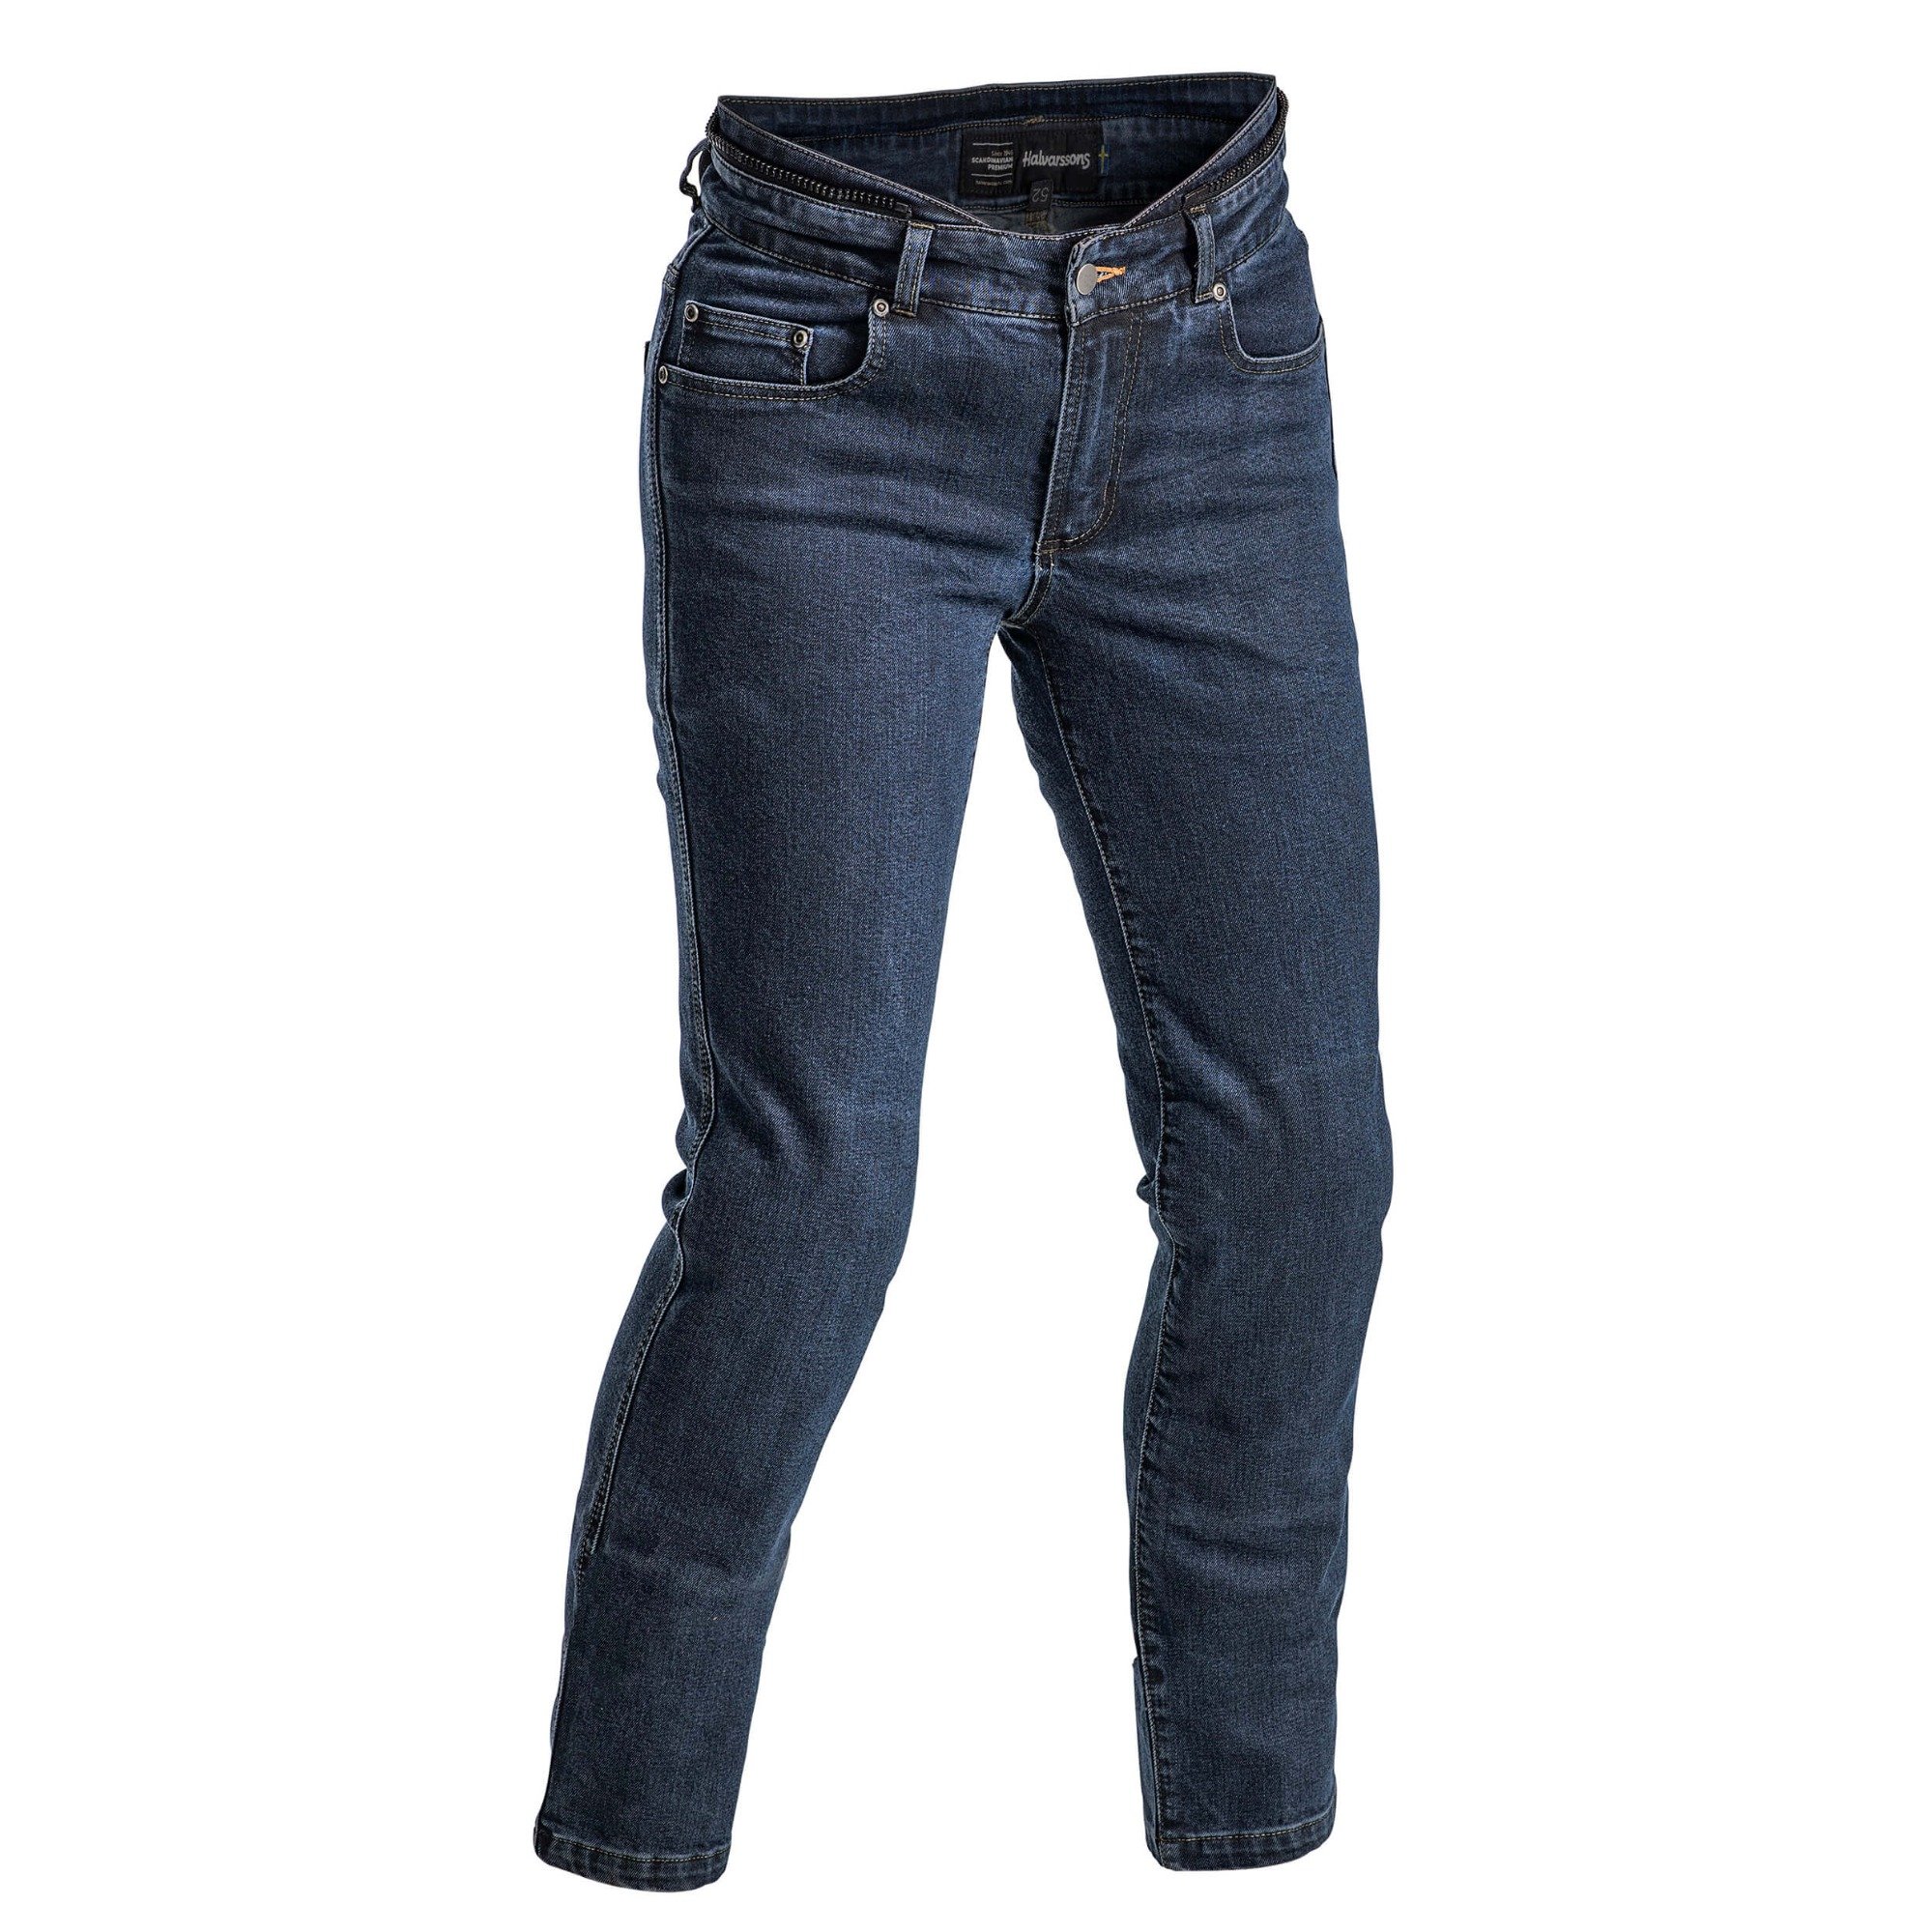 Image of Halvarssons Jeans Rogen Woman Blue Size 46 ID 6438235239140